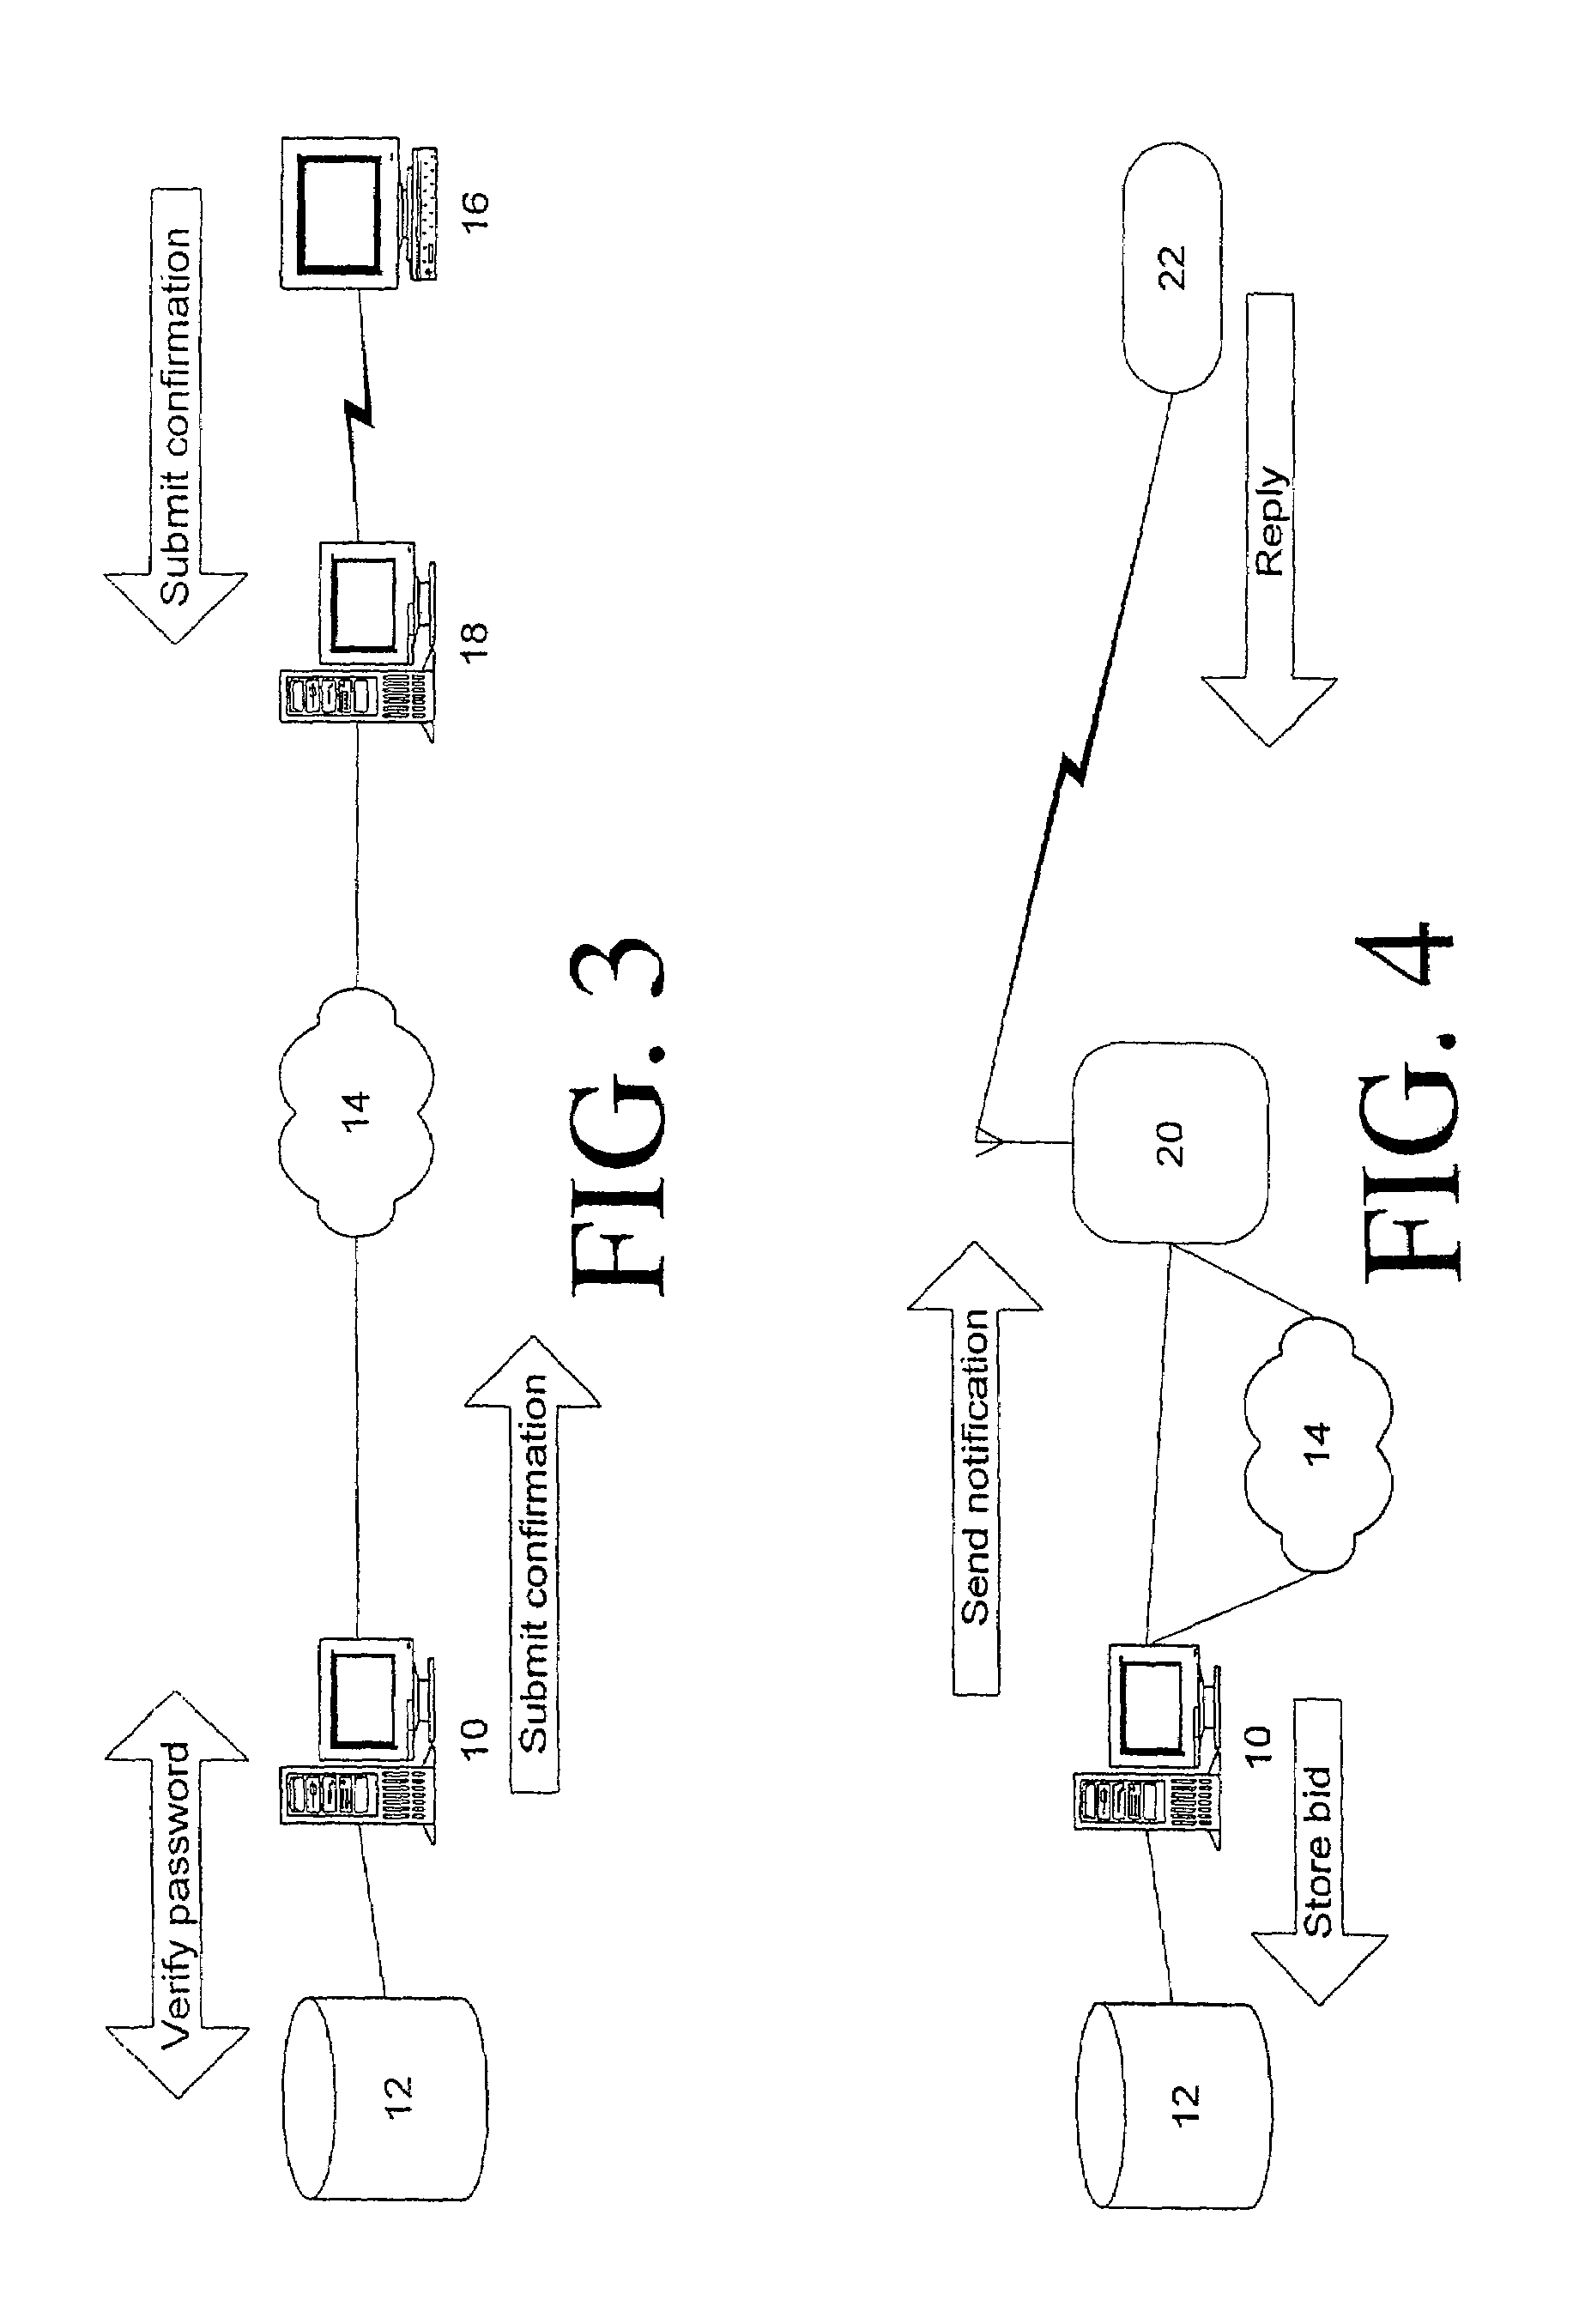 Trading and auction system, and methods for the authentication of buyers and sellers and for the transmission of trading instructions in a trading and auction system